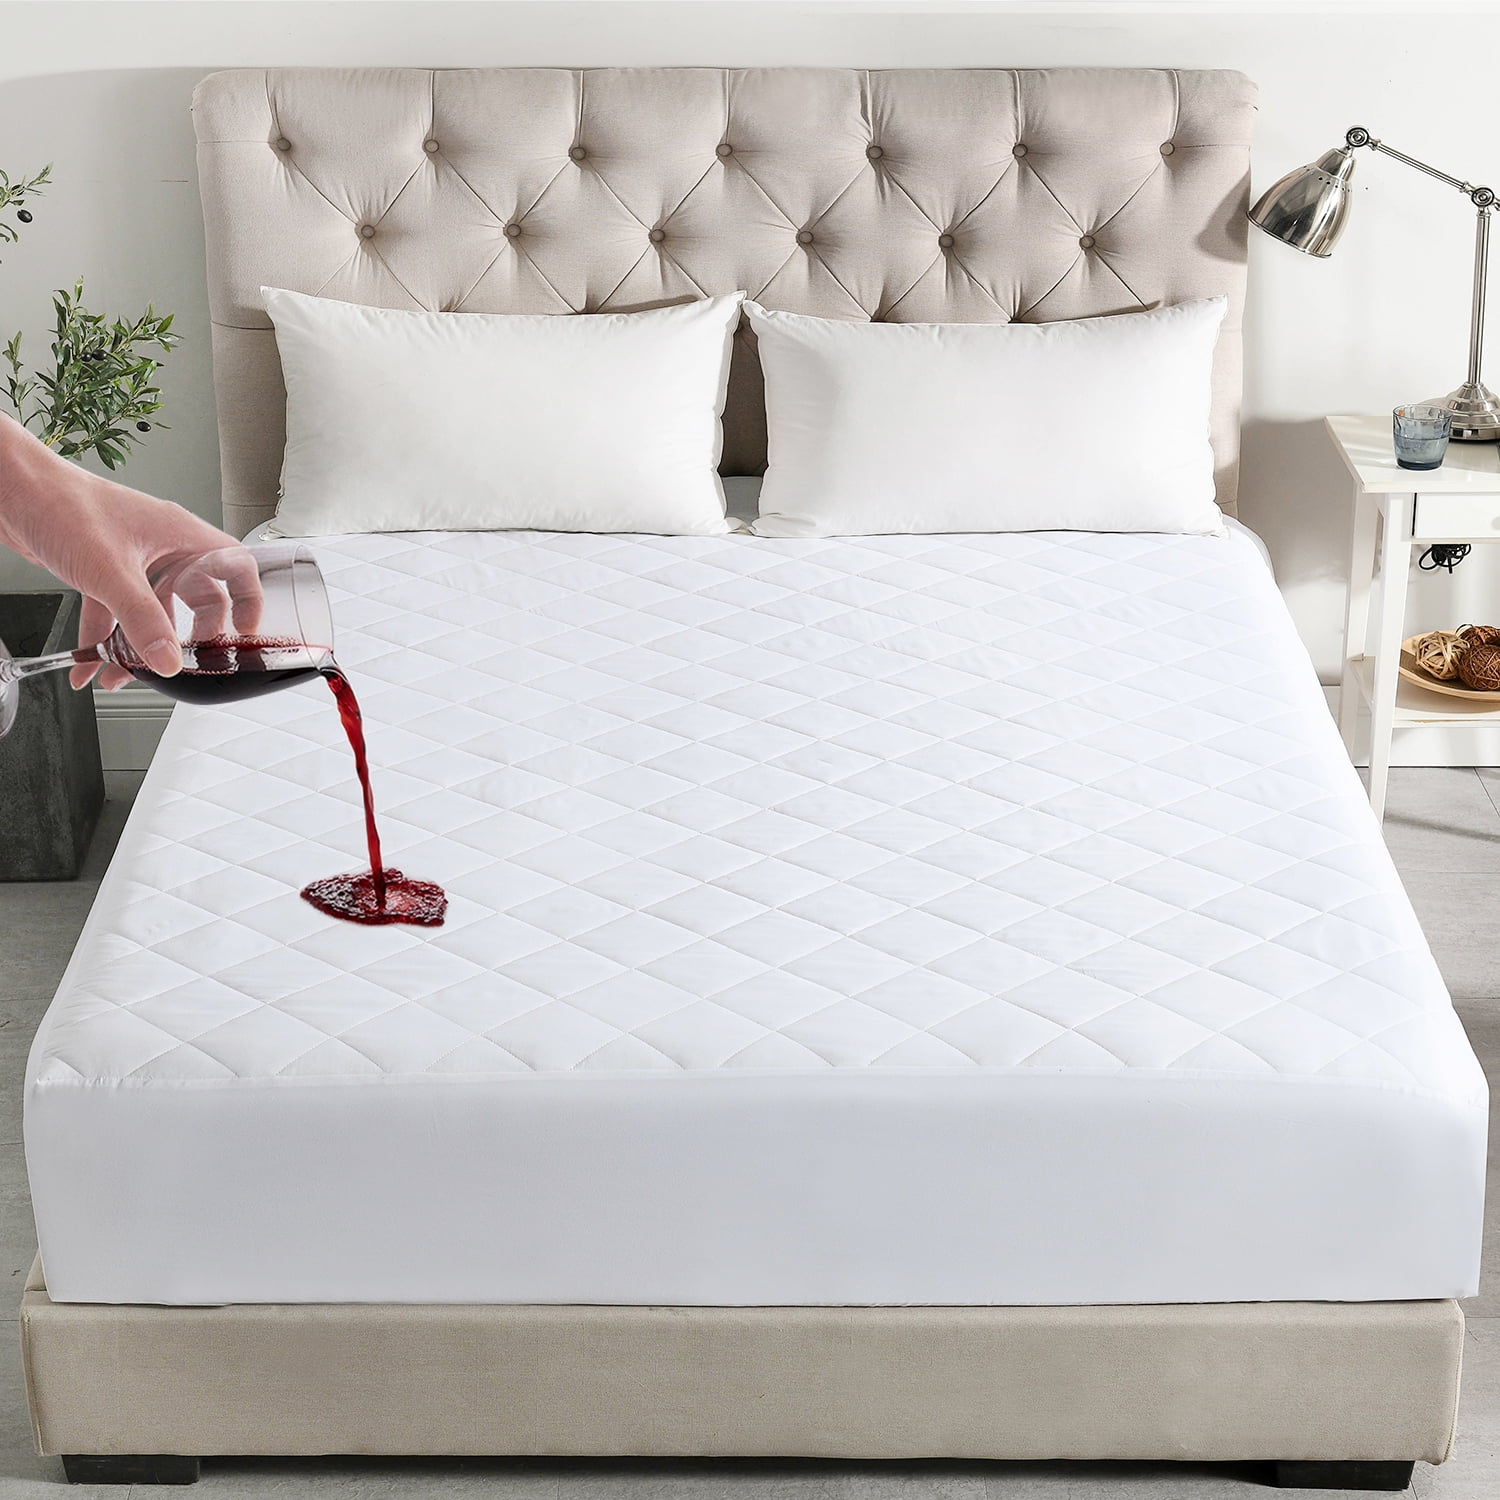 New Extra Deep Soft Microfiber Waterproof Quilted Mattress Bed Protector Topper 